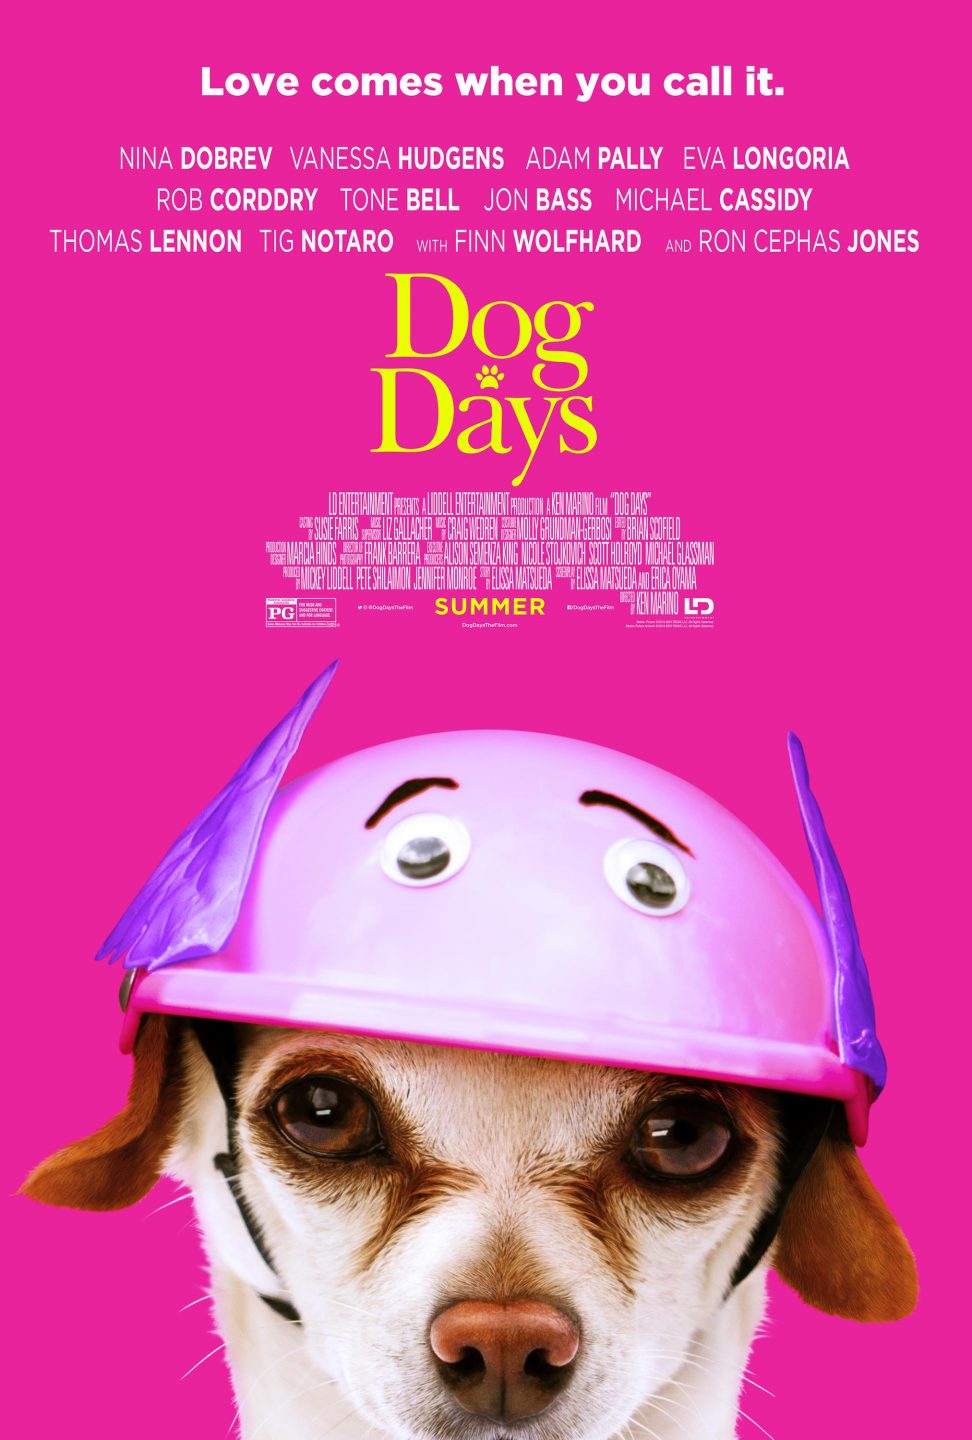 Dog Days character poster (LD Entertainment)